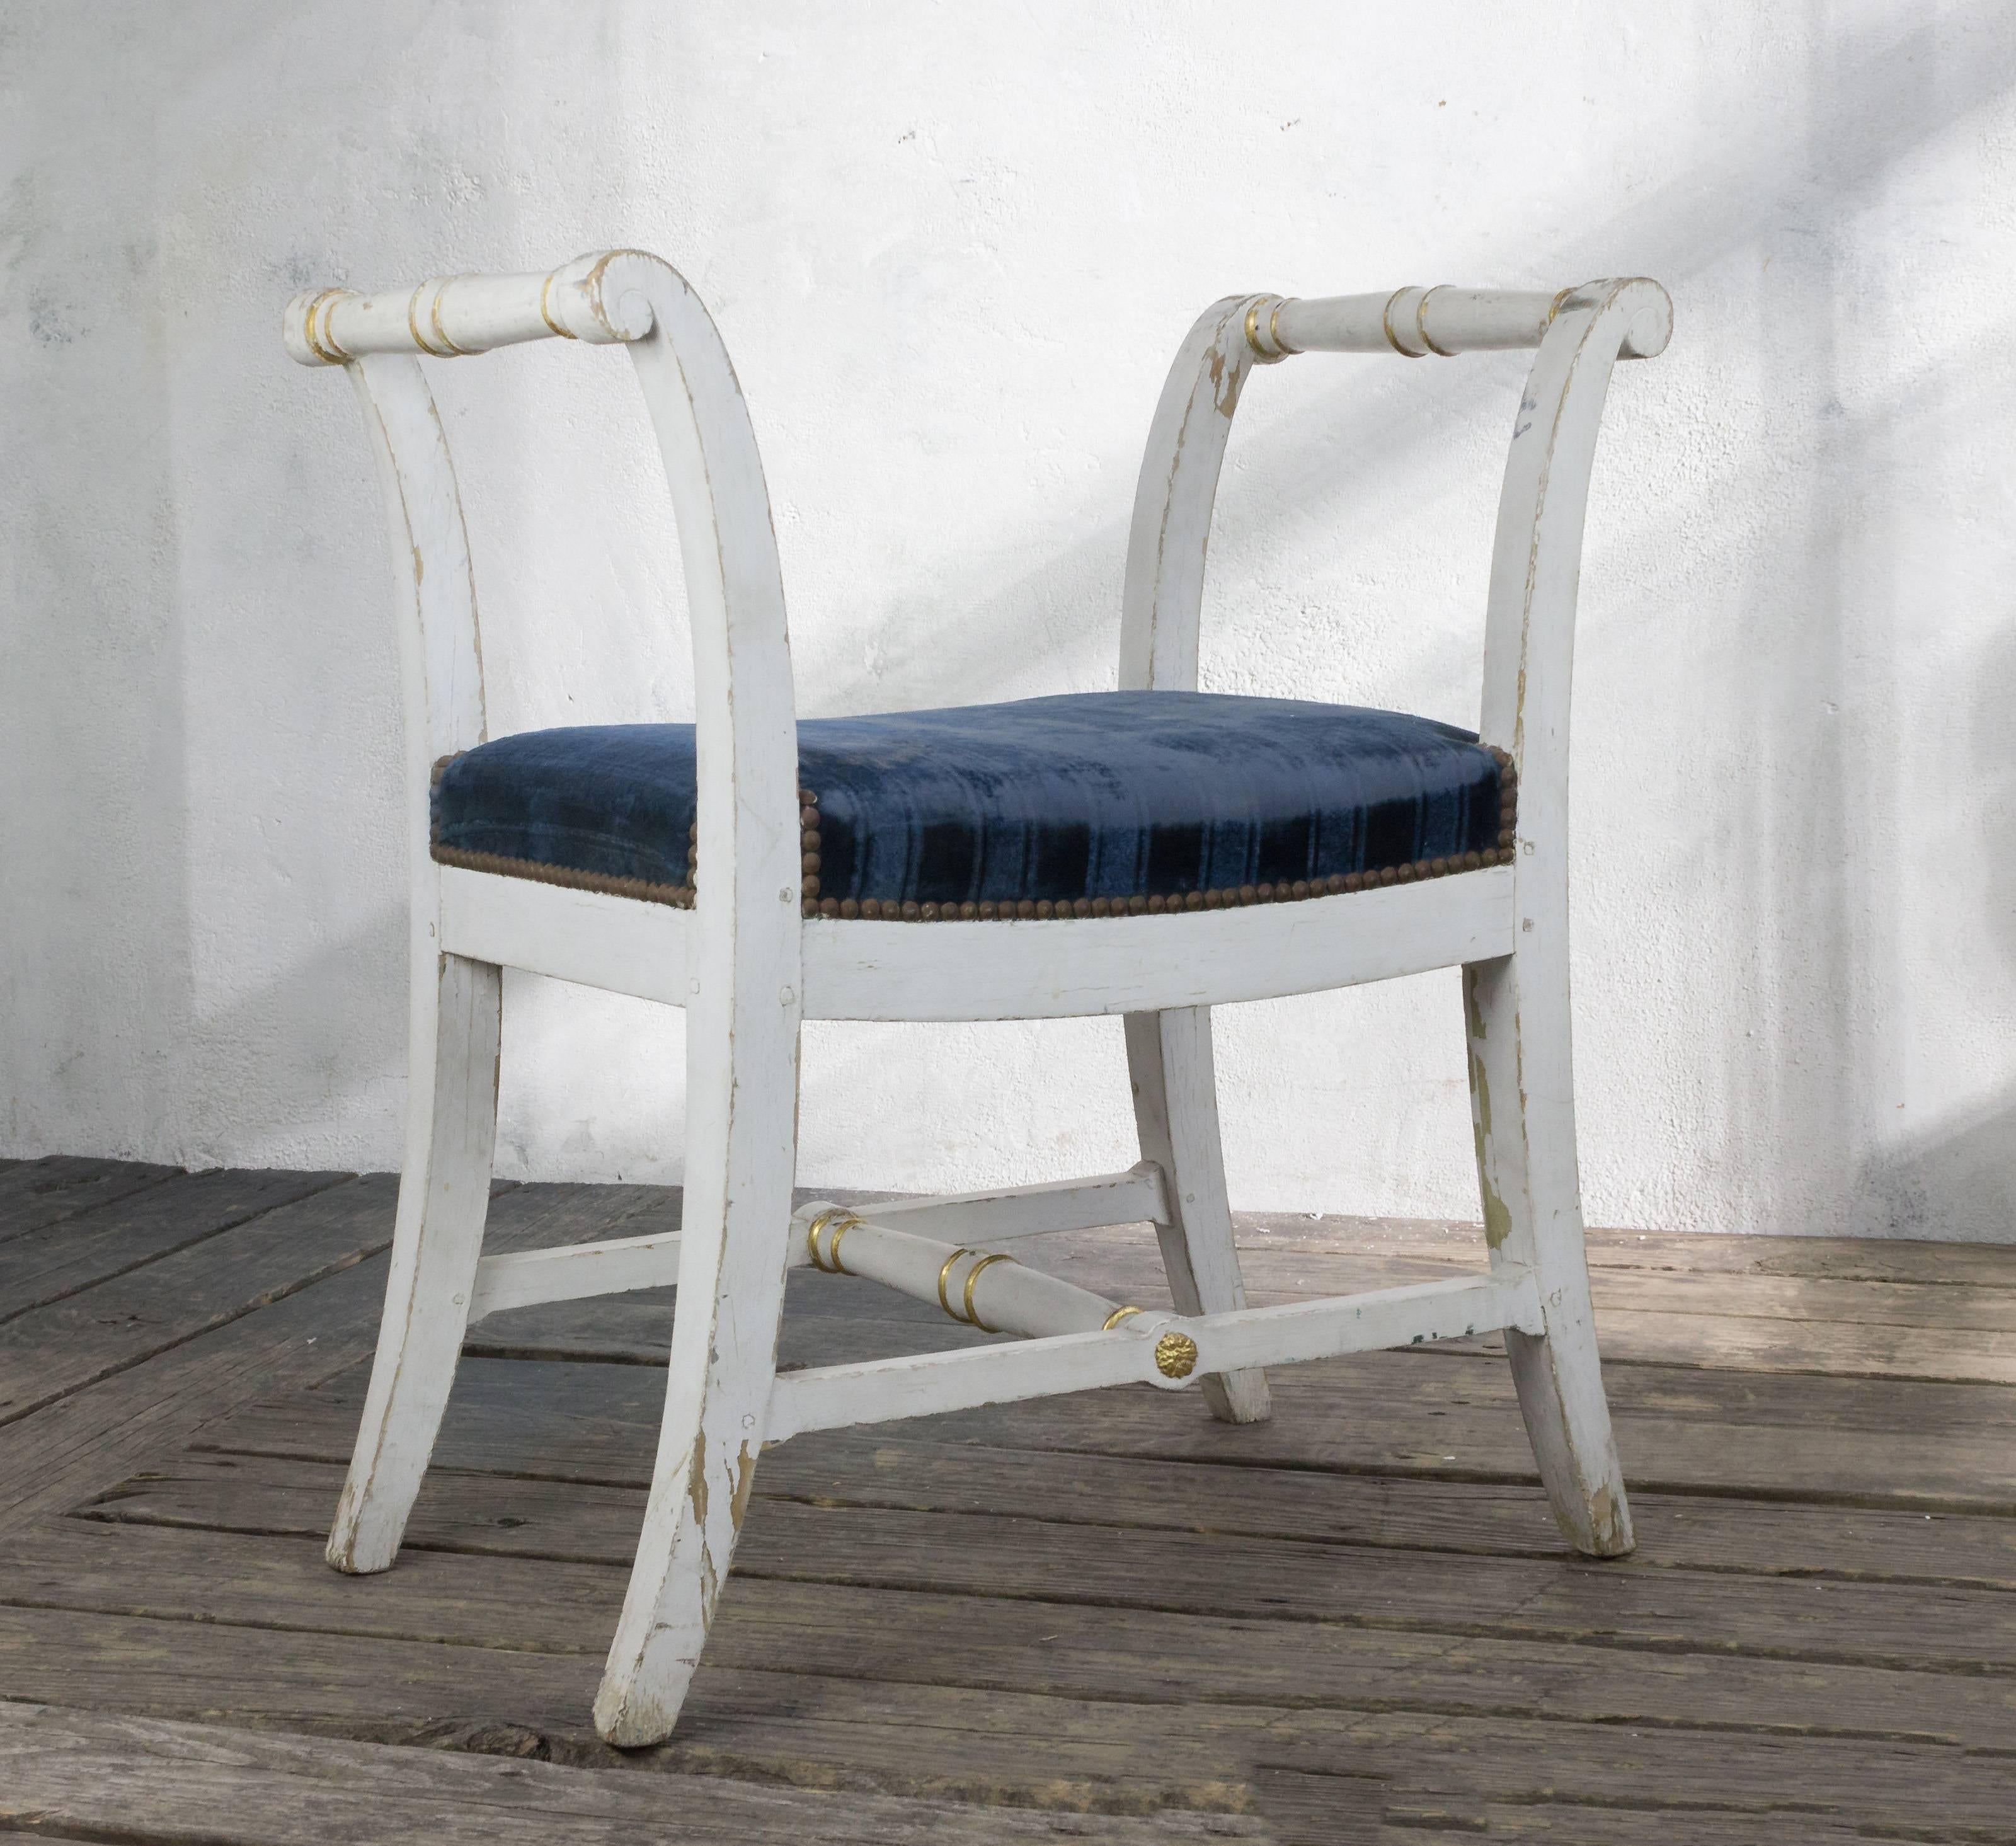 A small Empire style bench upholstered in blue velvet. Add a touch of classic beauty and elegance to any space with this small Empire style bench. Boasting the original white painted finish with gilt highlights, this piece is upholstered in a